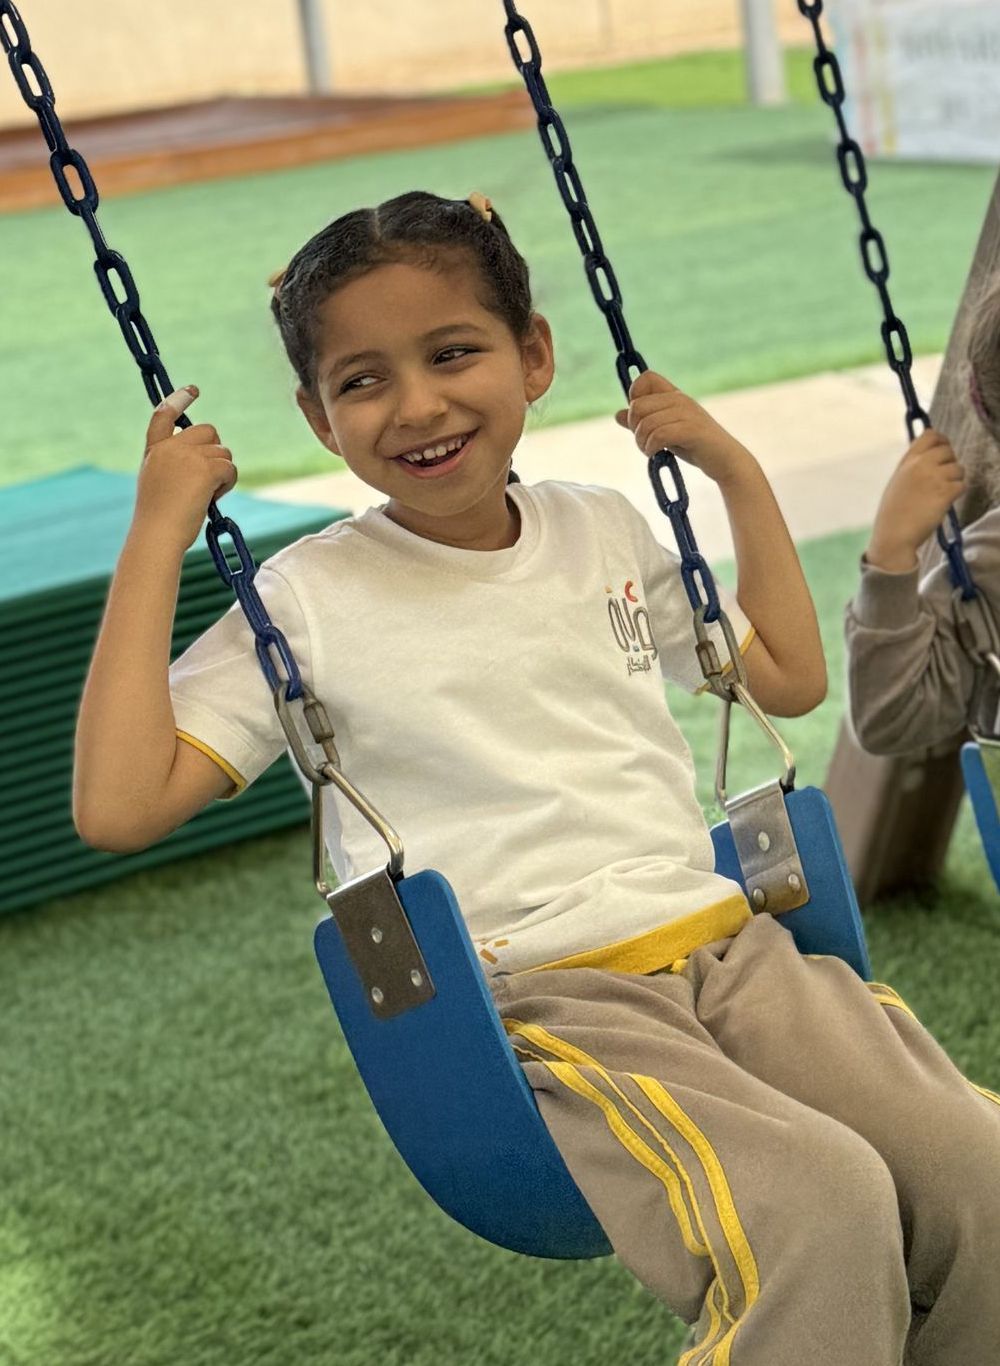 A little girl is sitting on a swing and smiling.